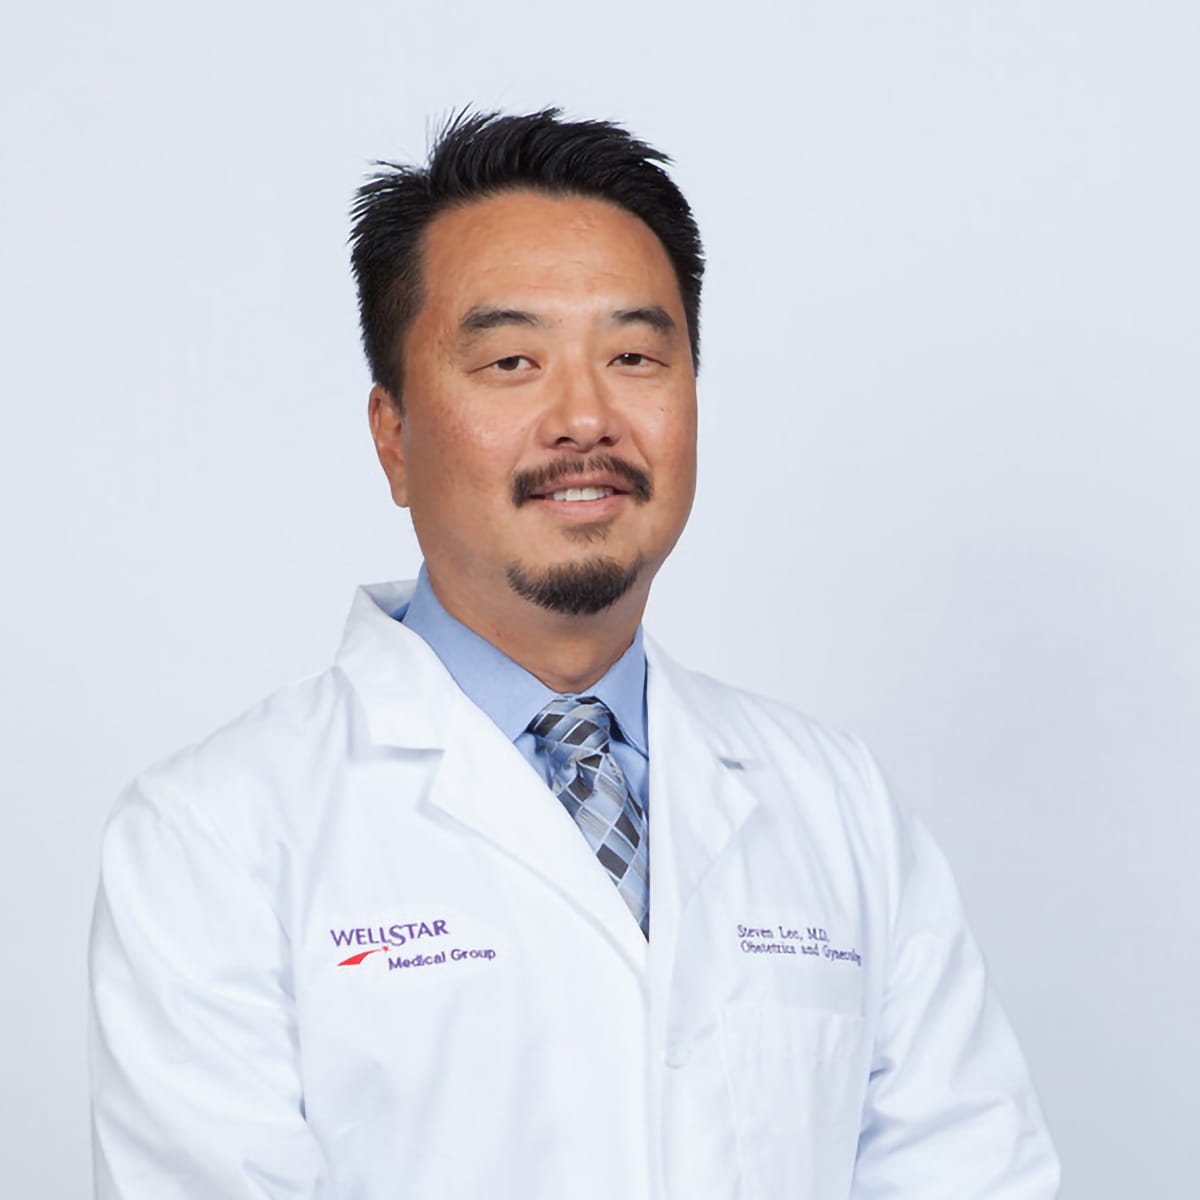 Steven Lee, MD - Obstetrics and Gynecology